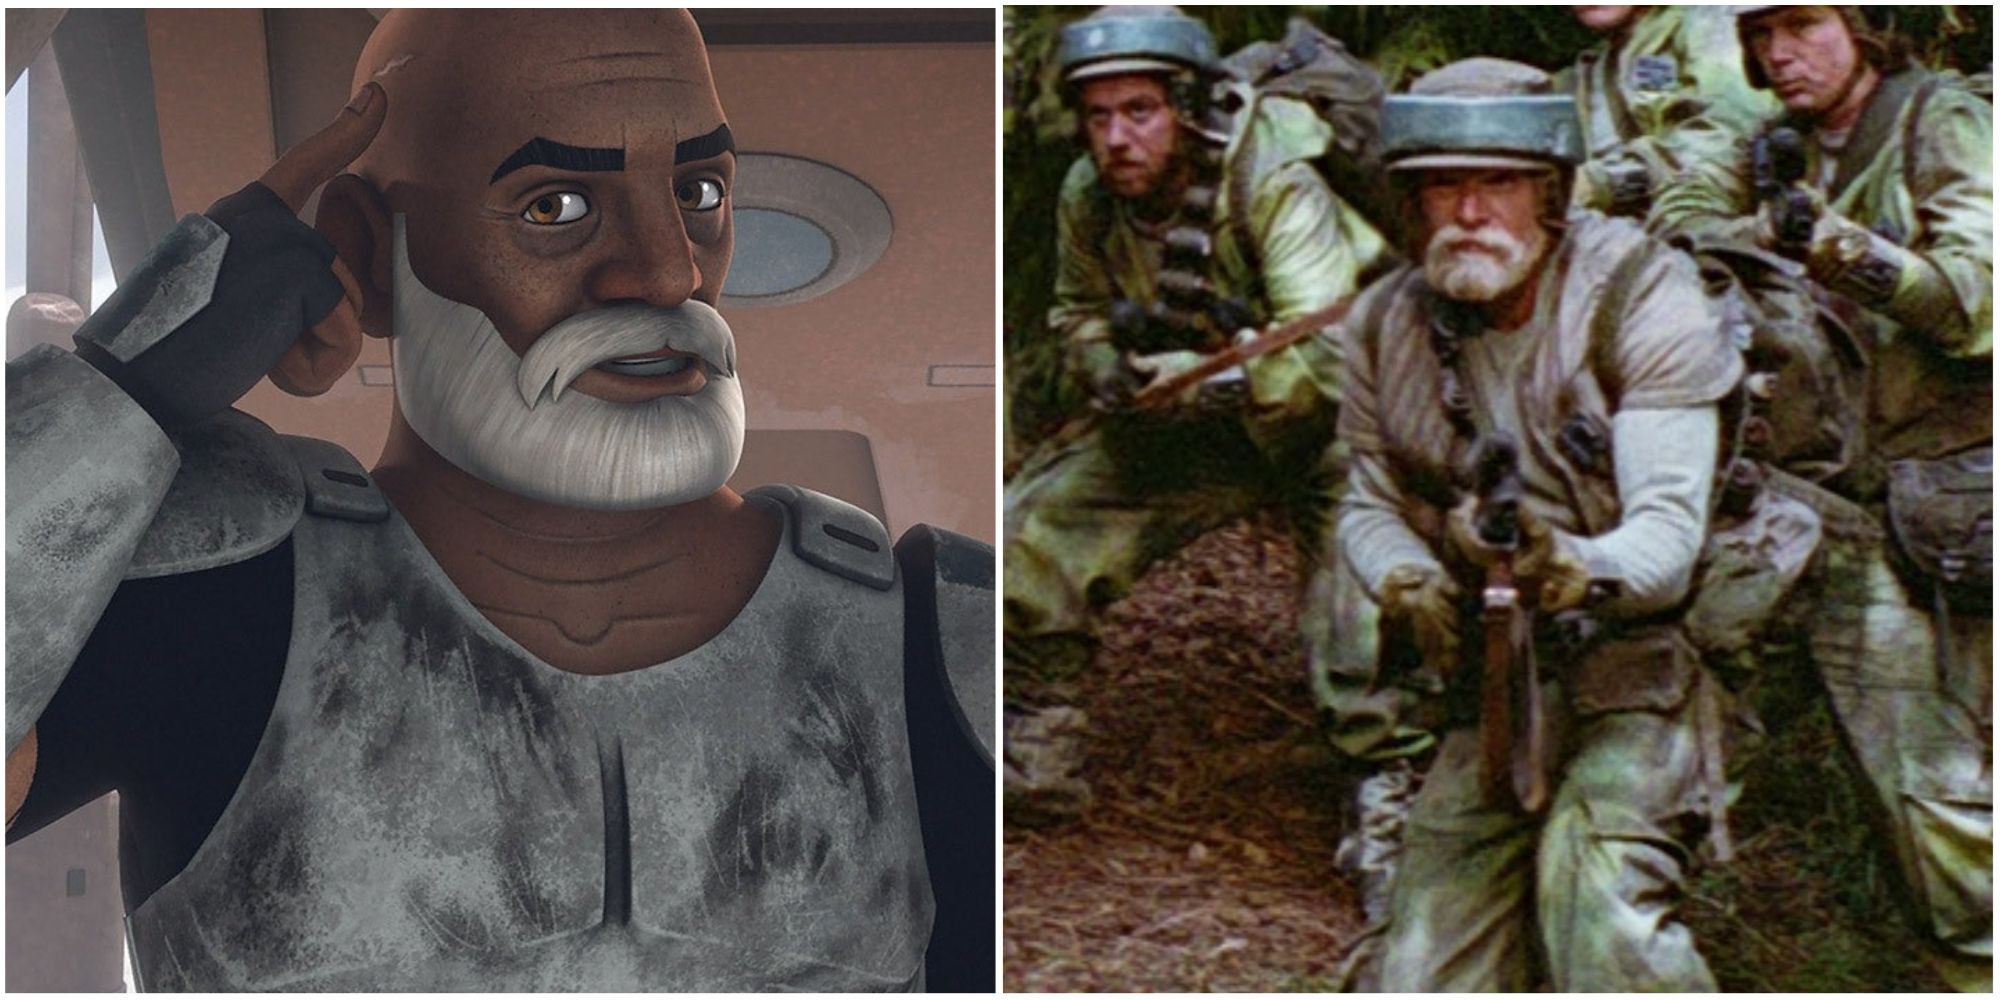 Rex in Star Wars Rebels and Return of the Jedi